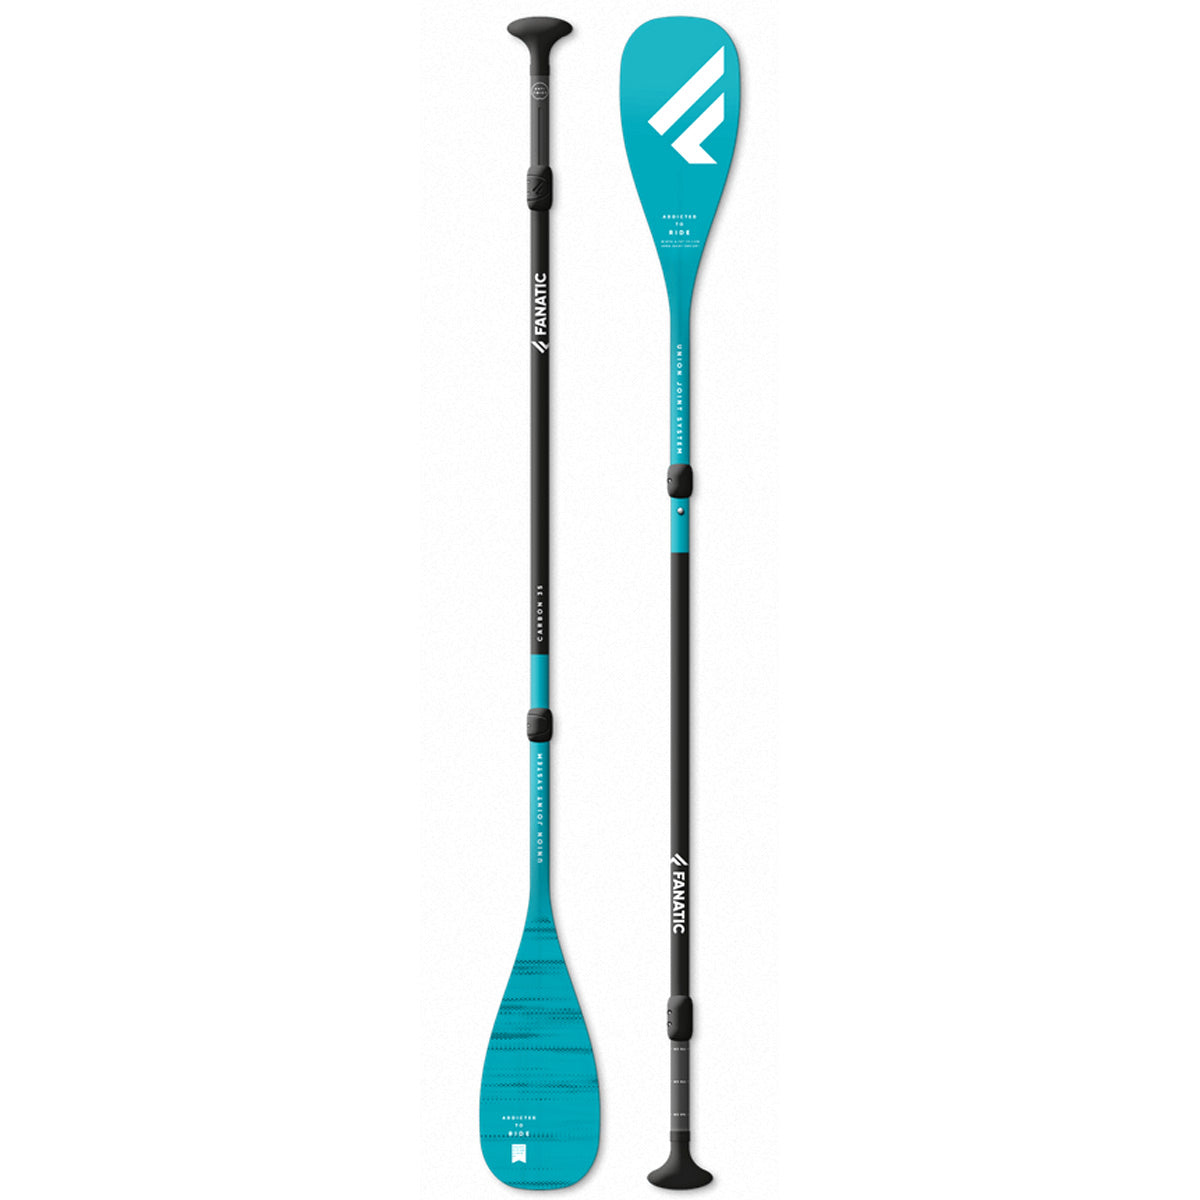 Fanatic Fly Air Premium / C35 Package - SUP